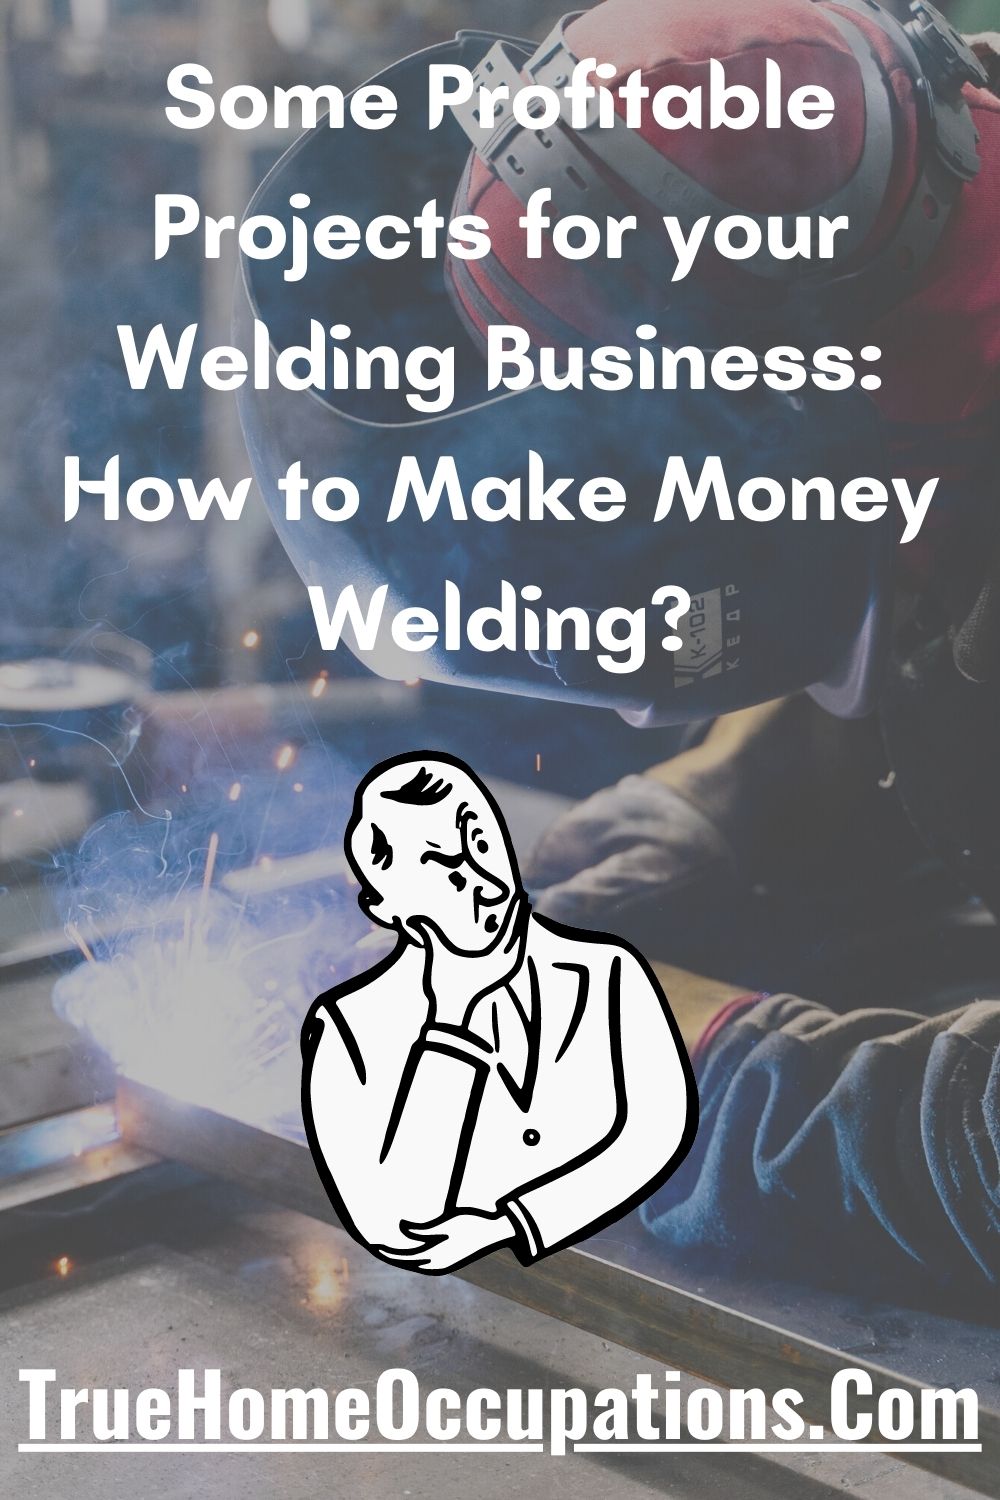 Some Profitable Projects for your Welding Business: How to Make Money Welding? - TrueHomeOccupations.Com